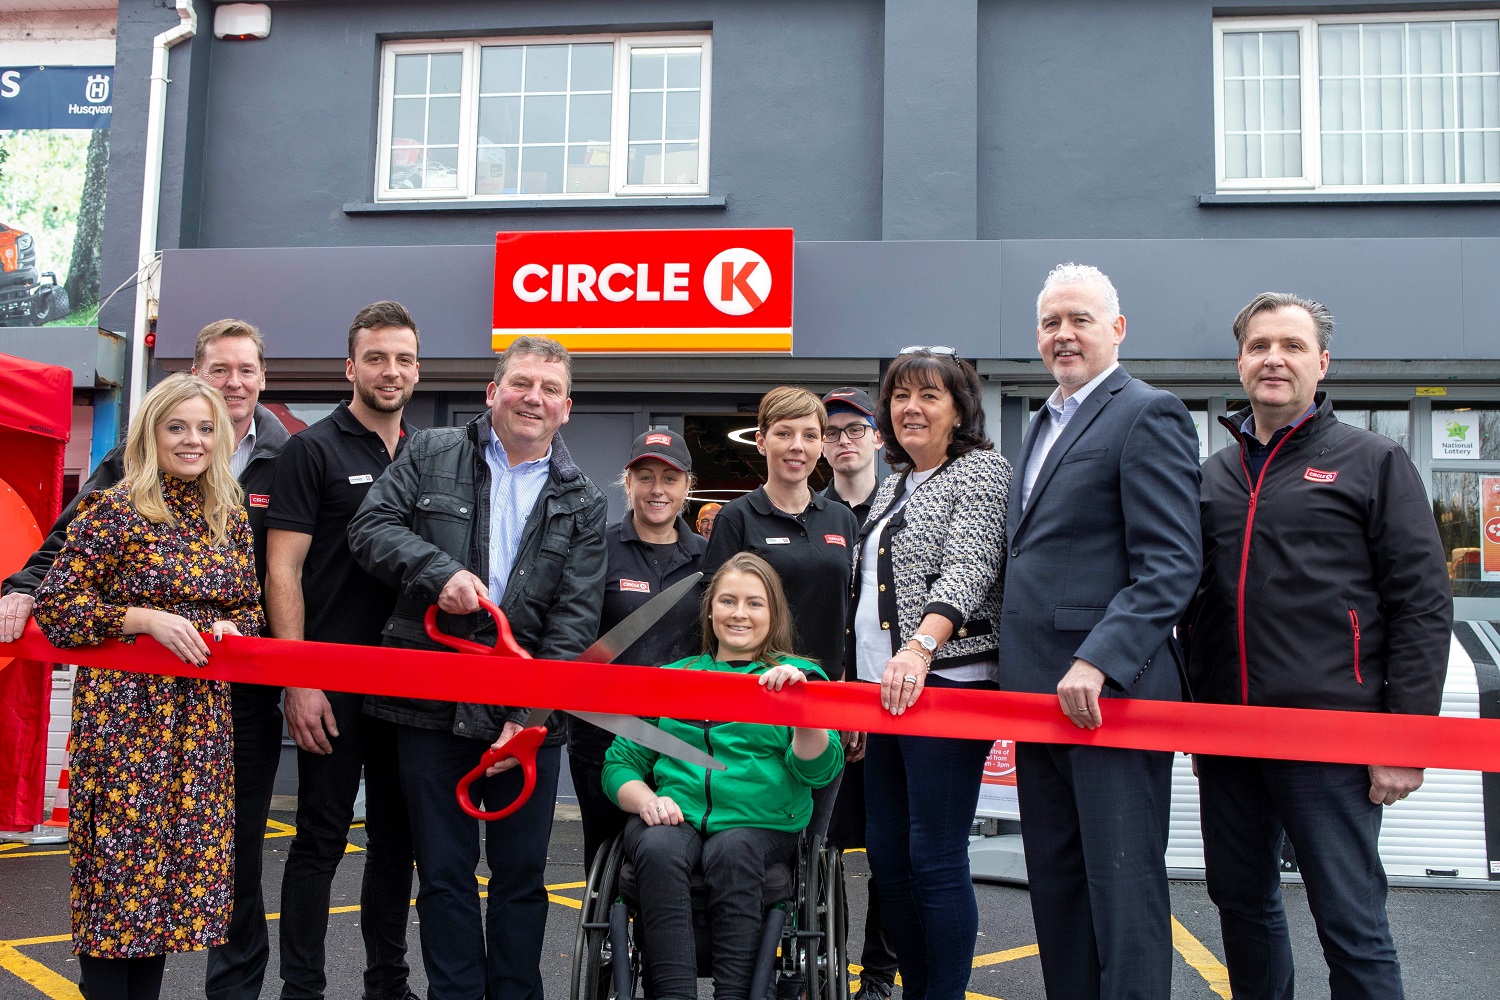 Circle K launches newly redeveloped Fairyhouse Motors Station in Ratoath, Co. Meath